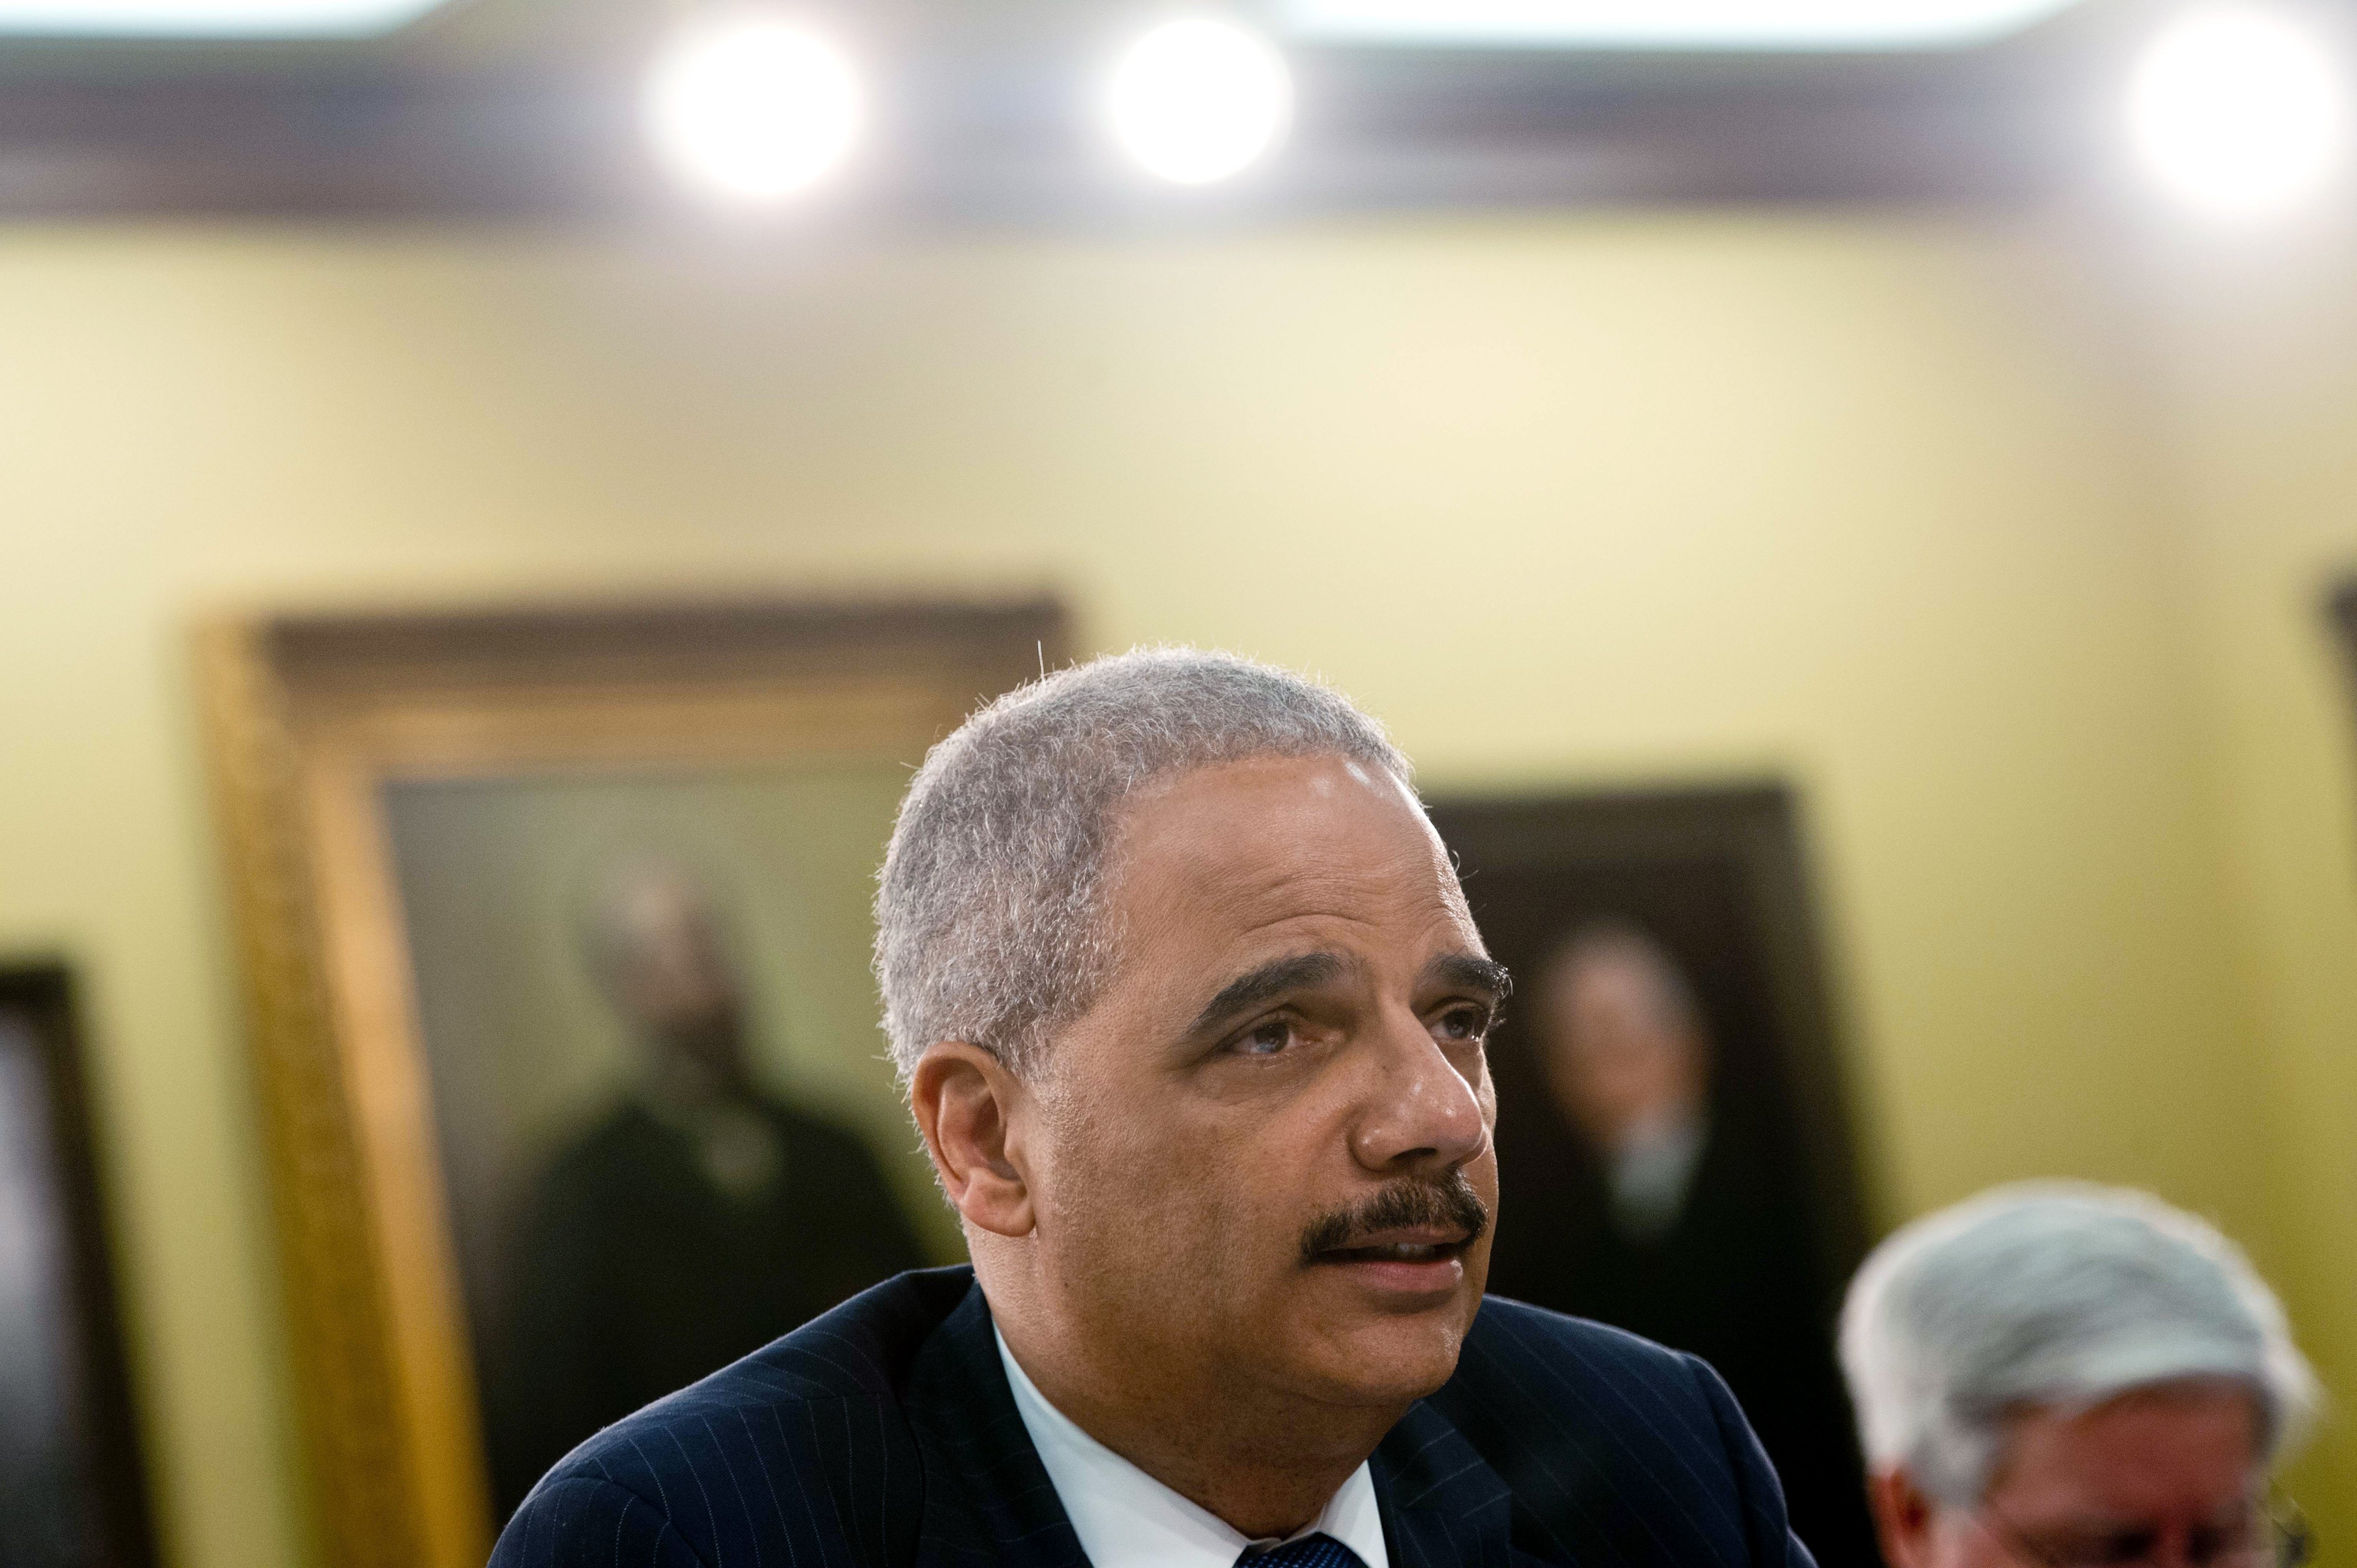 U.S. Attorney General Eric Holder testifies before a House Appropriations Committee Commerce, Justice, Science, and Related Agencies Subcommittee hearing on the Justice Department's fiscal year 2015 budget request on Capitol Hill in Washington, D.C. on April 4, 2014. (Nicholas Kamm—AFP/Getty Images)